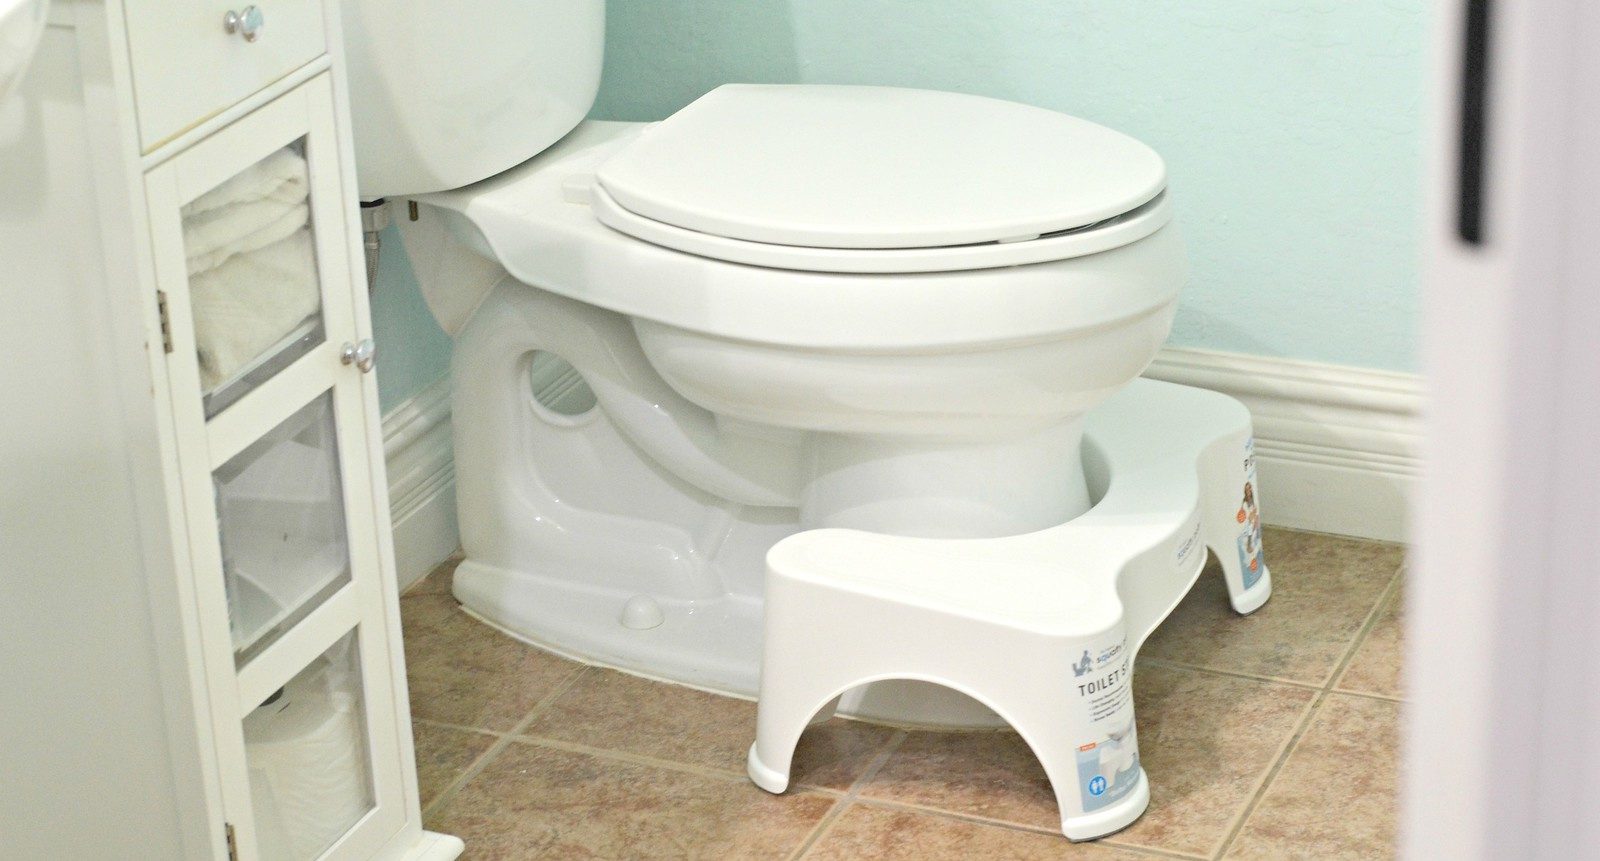 I Potty Trained My Toddler in Just ONE WEEK Using These Potty Training Tips!